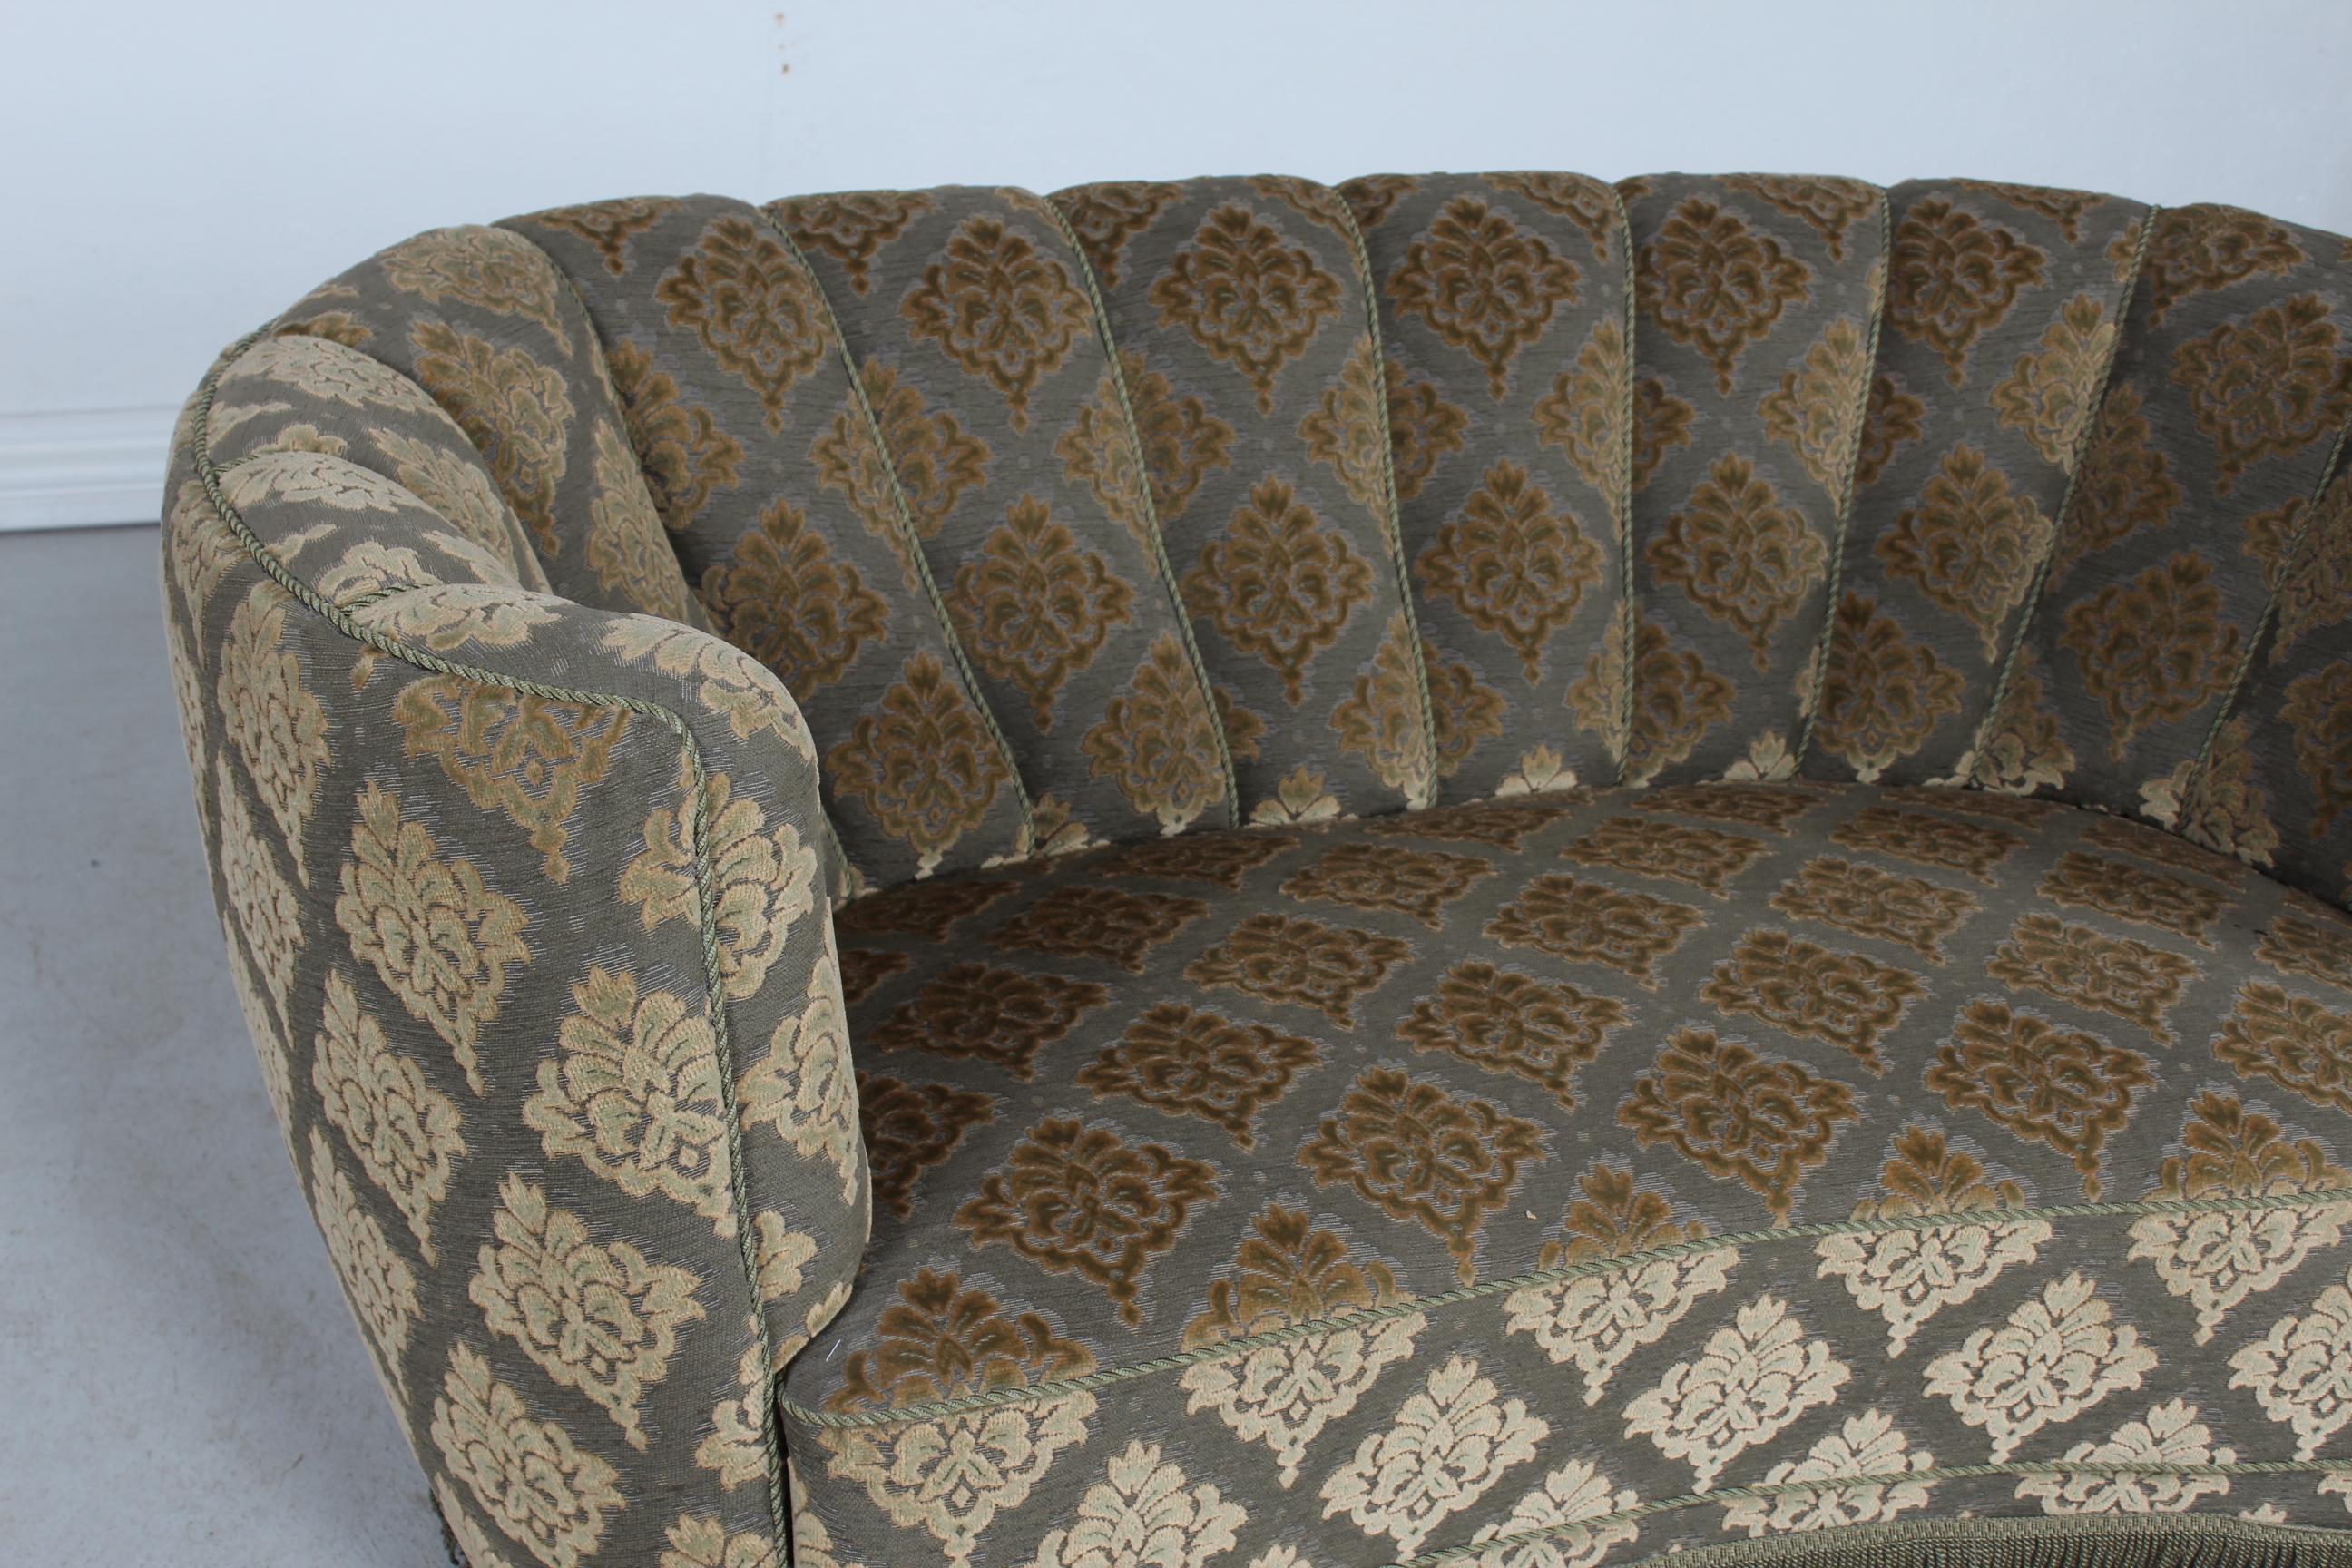 Danish curved Banana form Art Deco couch or sofa made in the 1950s.
The legs are made of dark stained wood and the sofa is upholstered with green velour/velvet with floral pattern and fringes.
Made by Danish furniture maker in the 1950s. 

The